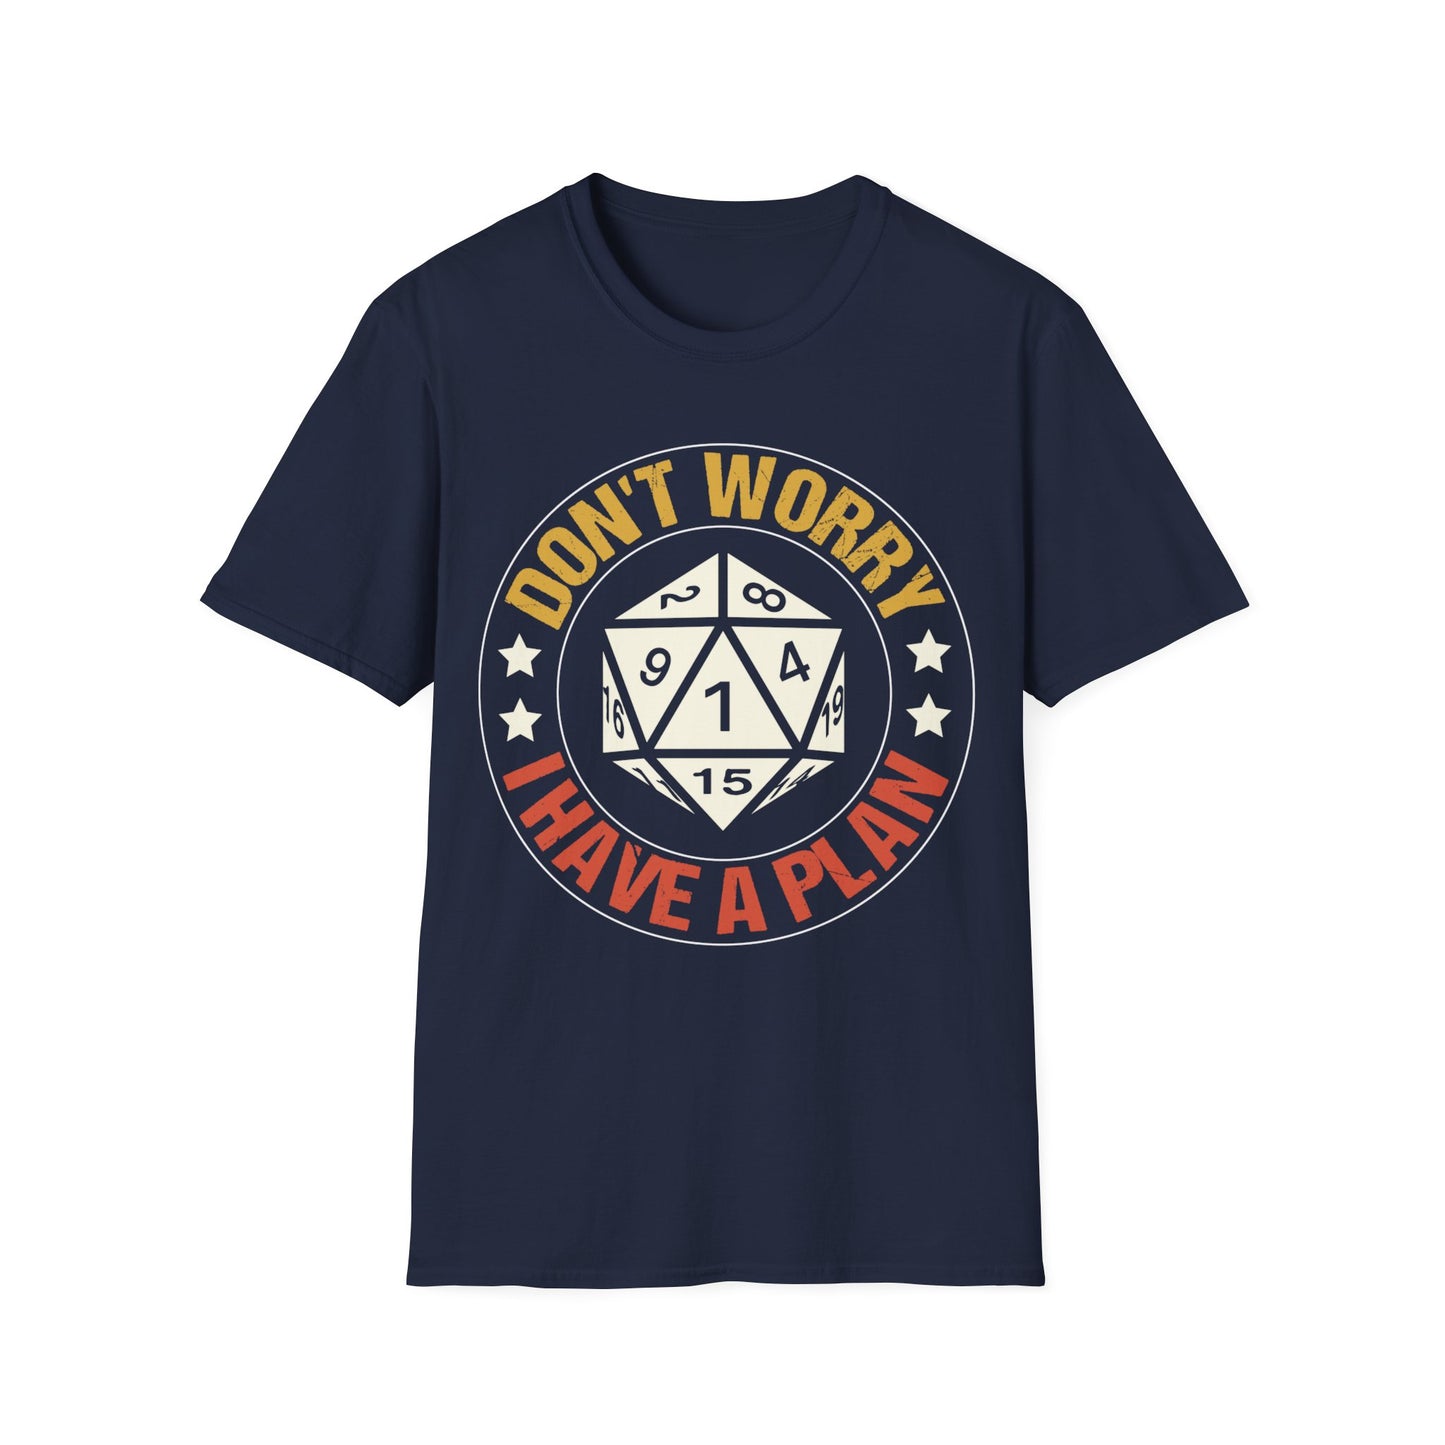 Don't Worry I Have A Plan T-Shirt